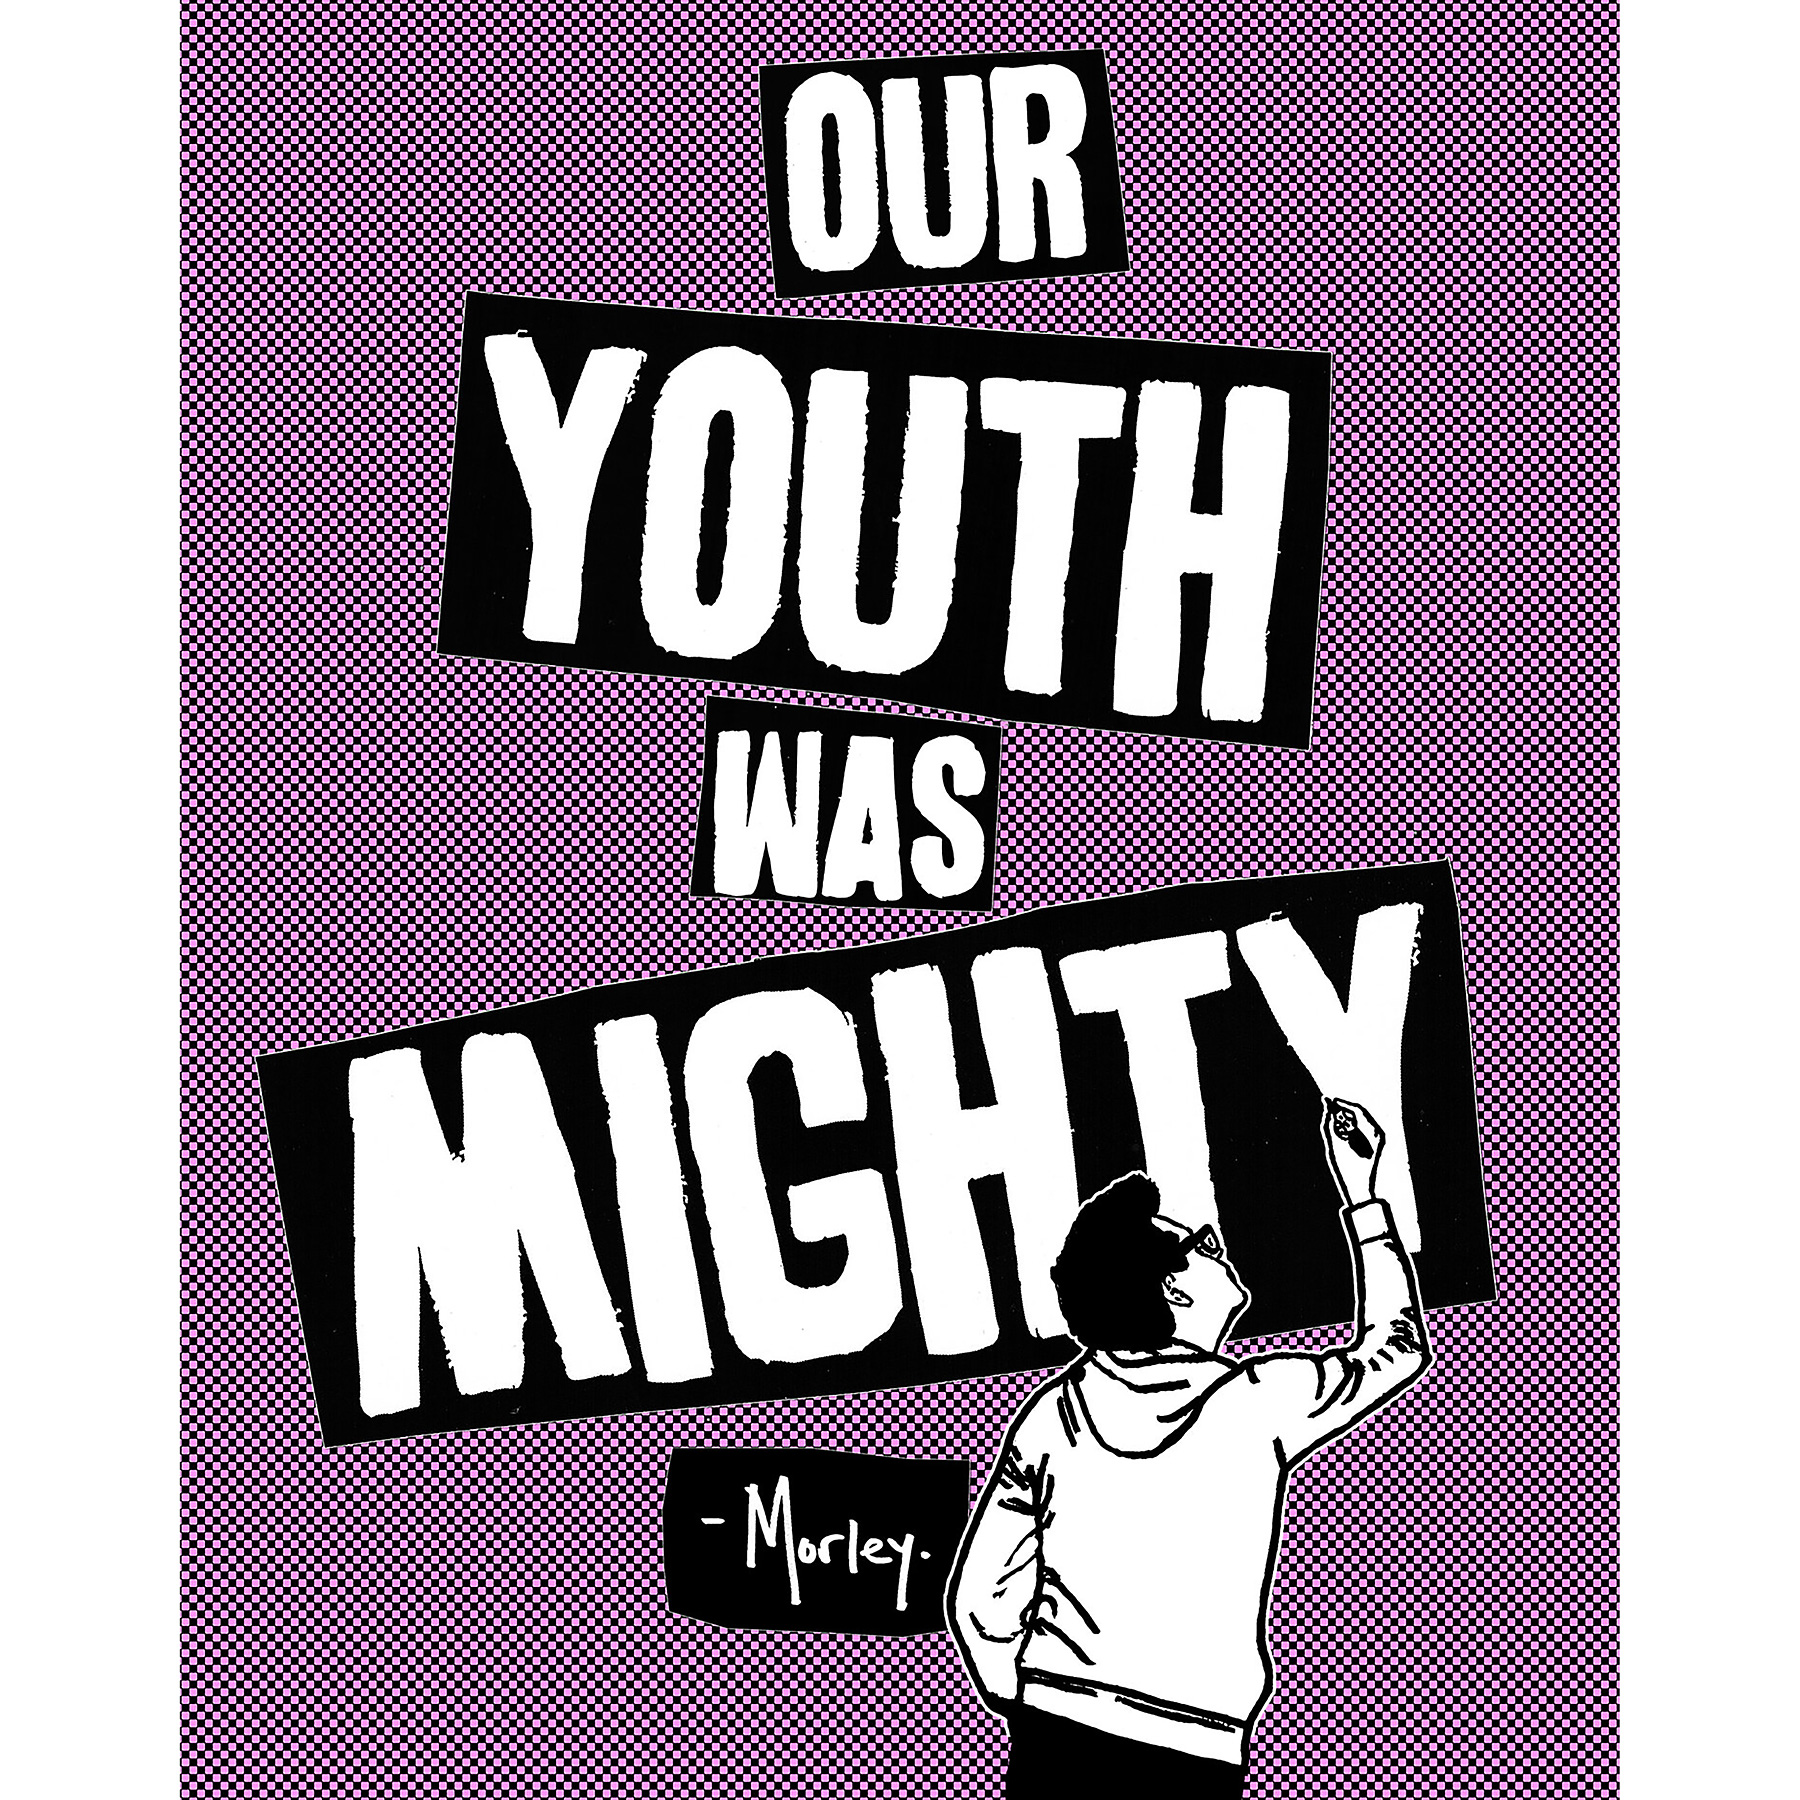 'Our Youth Was Mighty' by street artist Morley